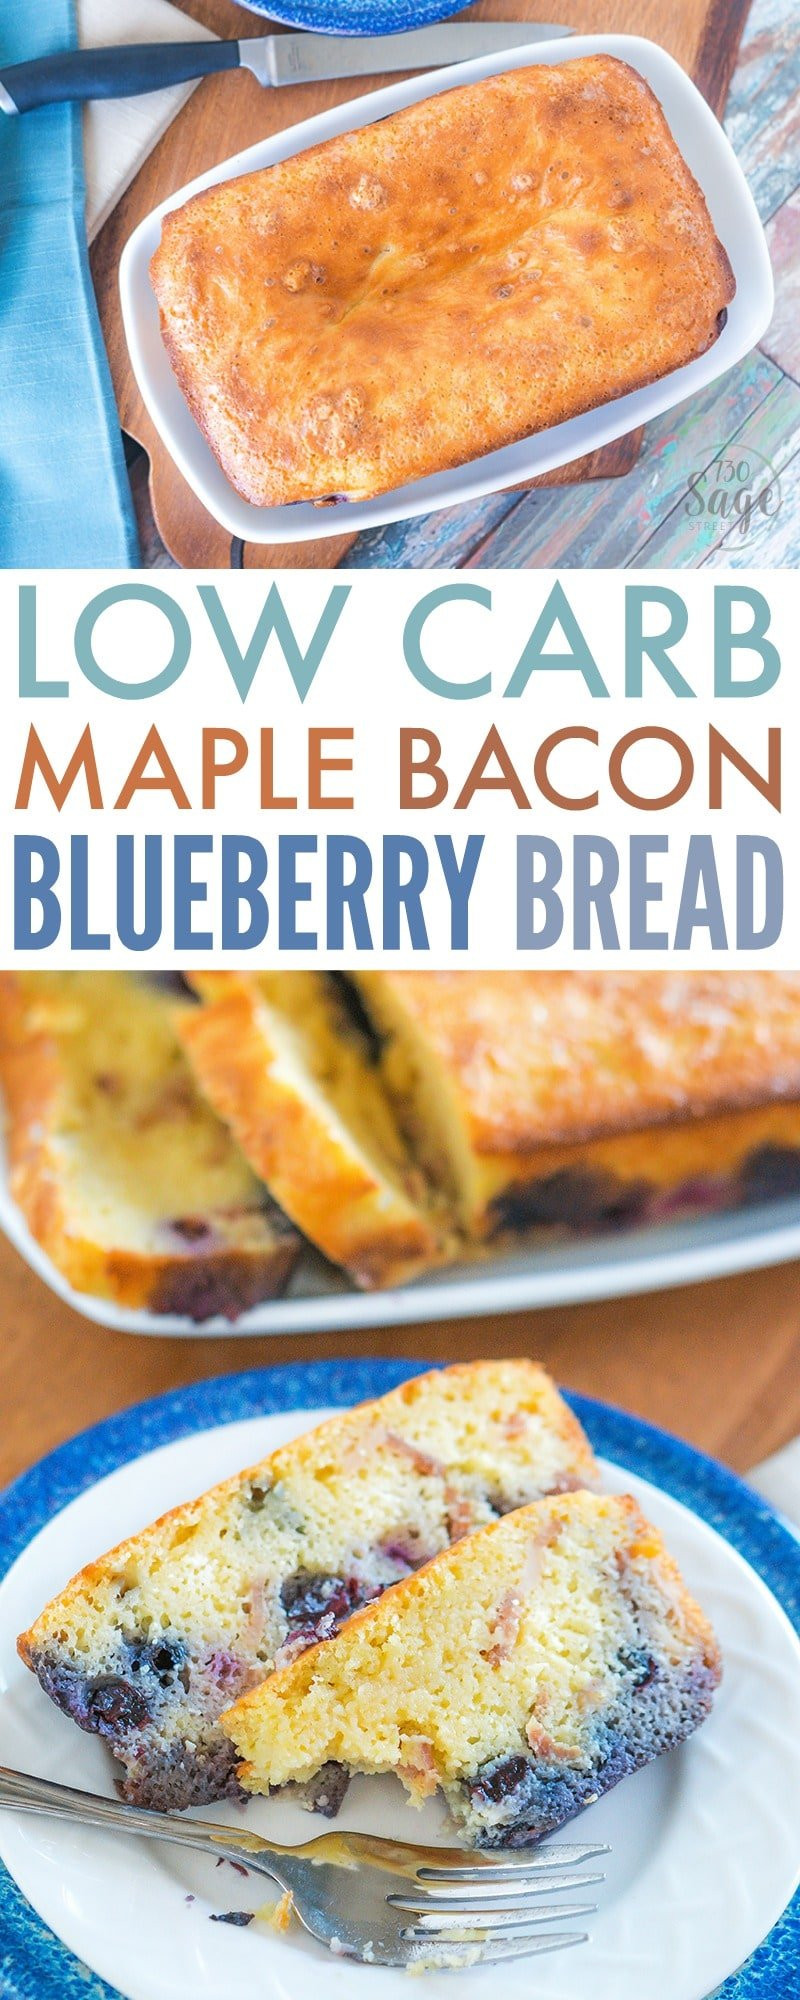 Low Carb Bacon Recipes
 Low Carb Maple Bacon Blueberry Bread 730 Sage Street